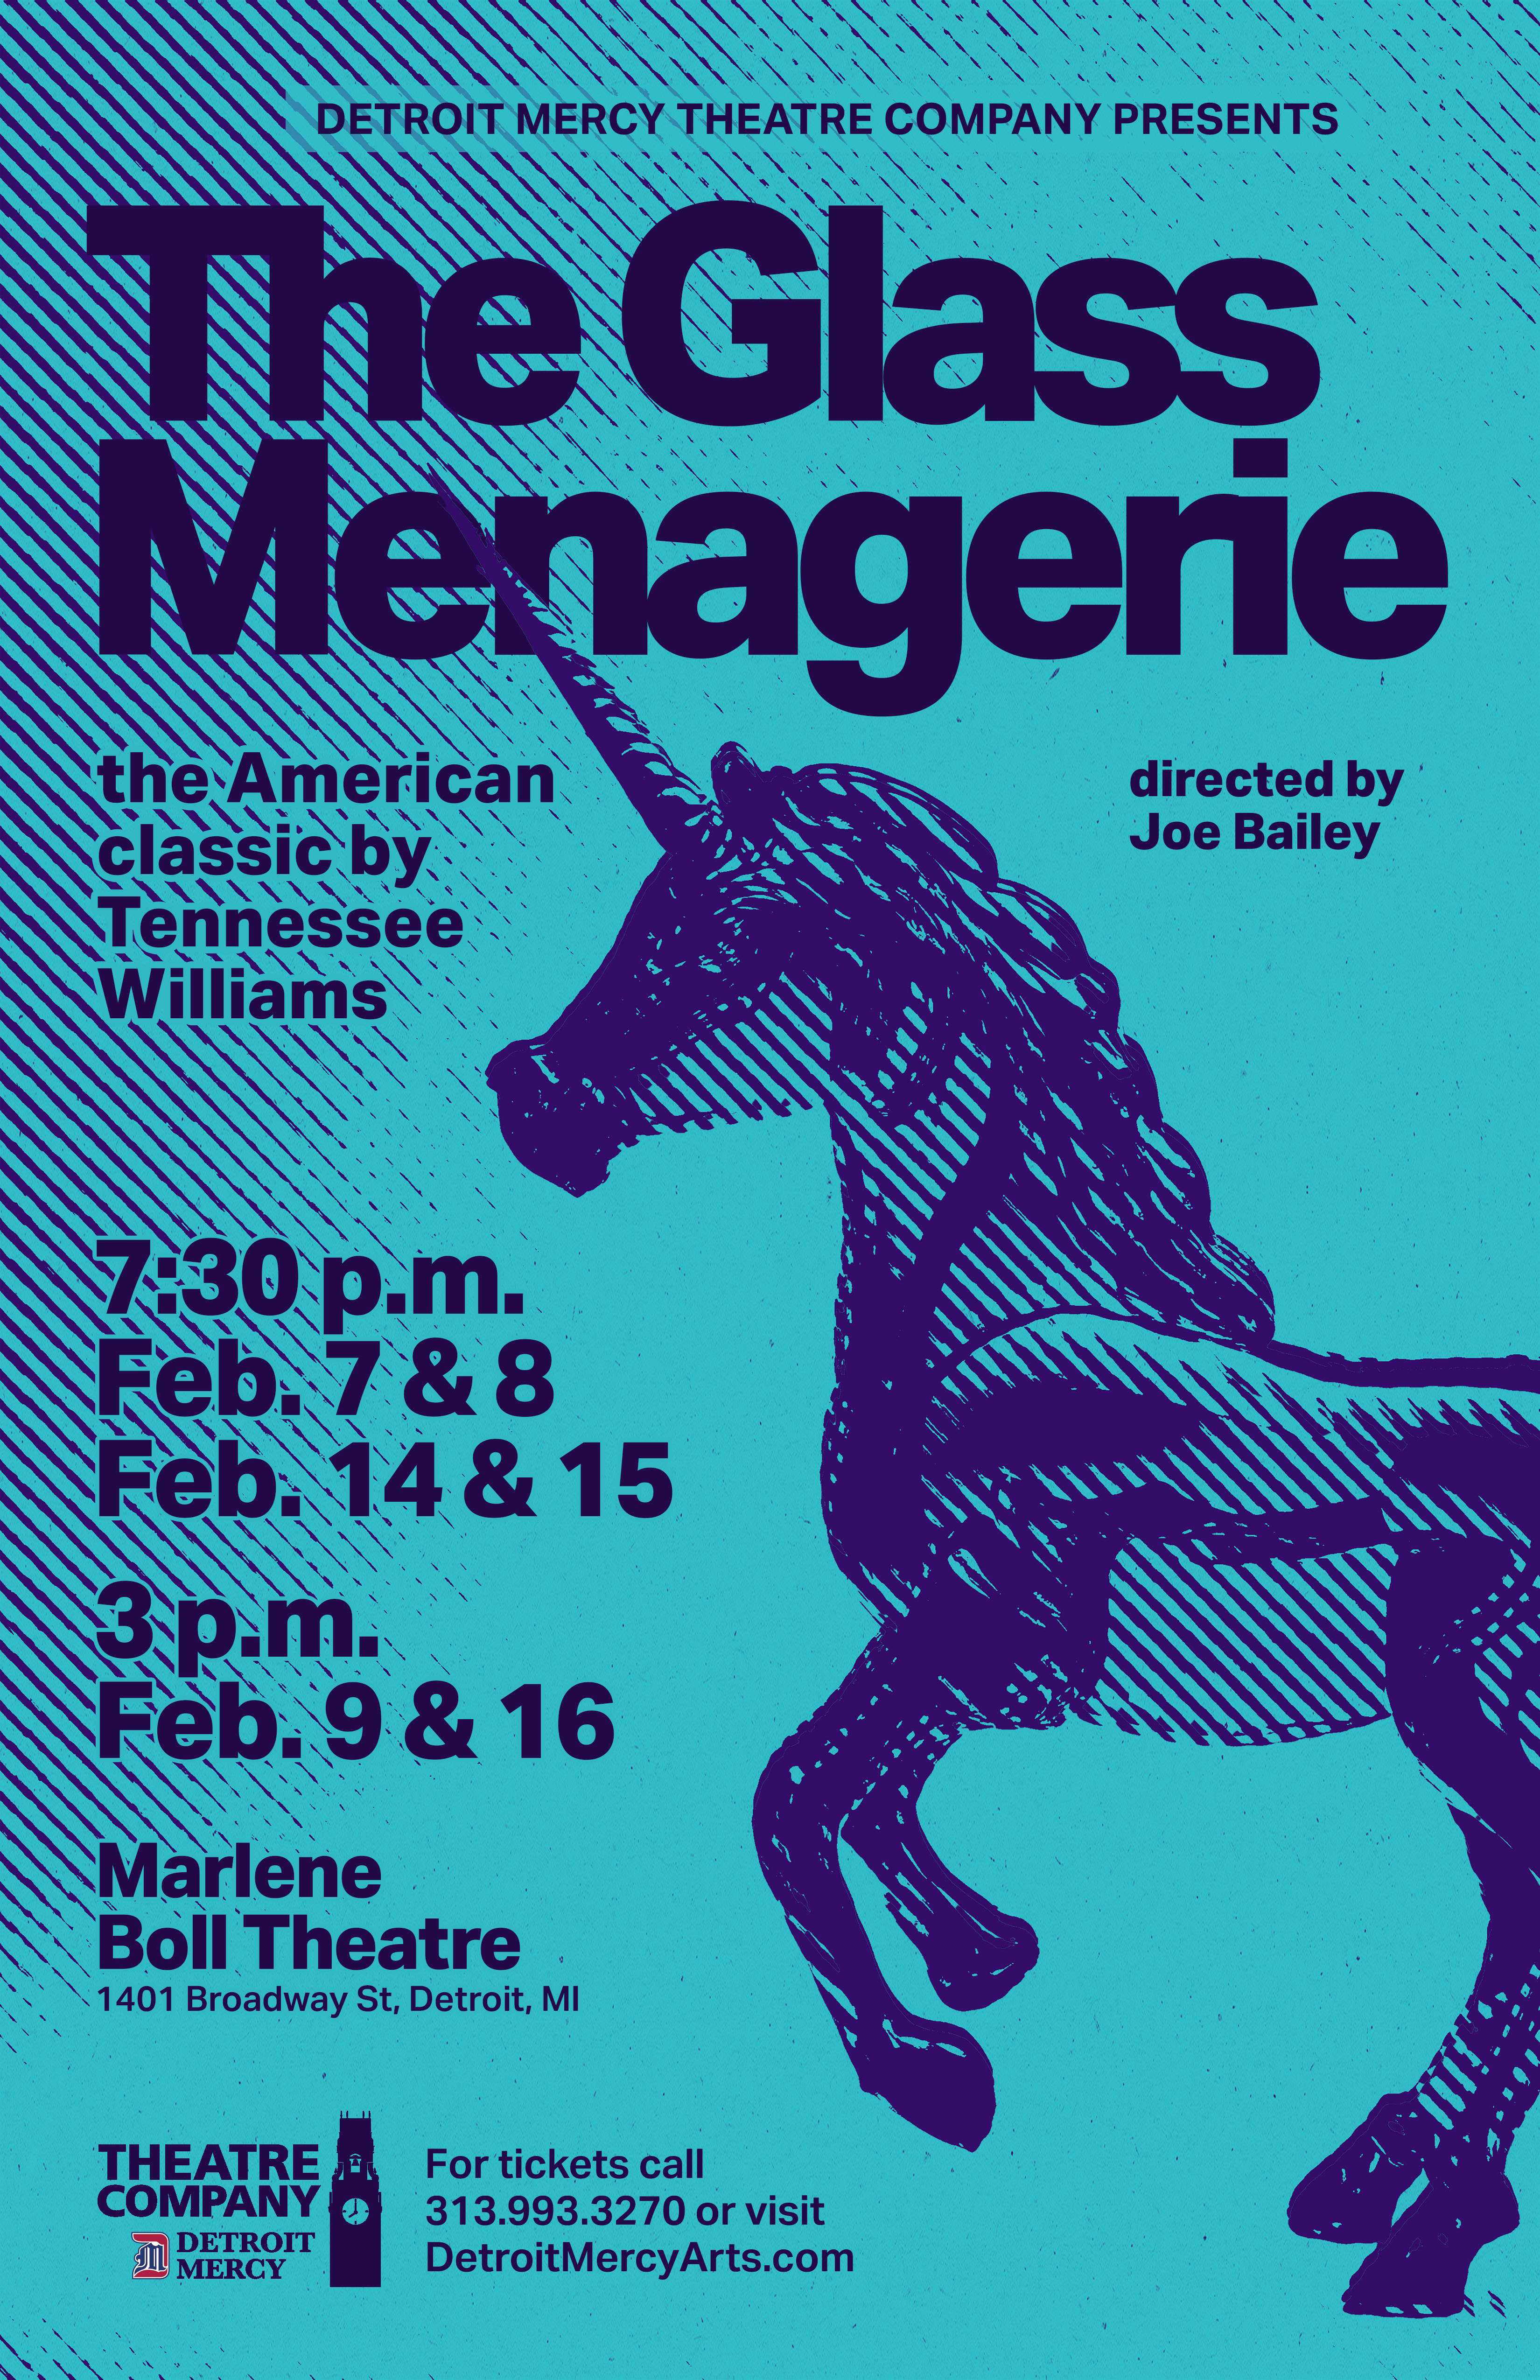 DMTC poster for The Glass Menagerie